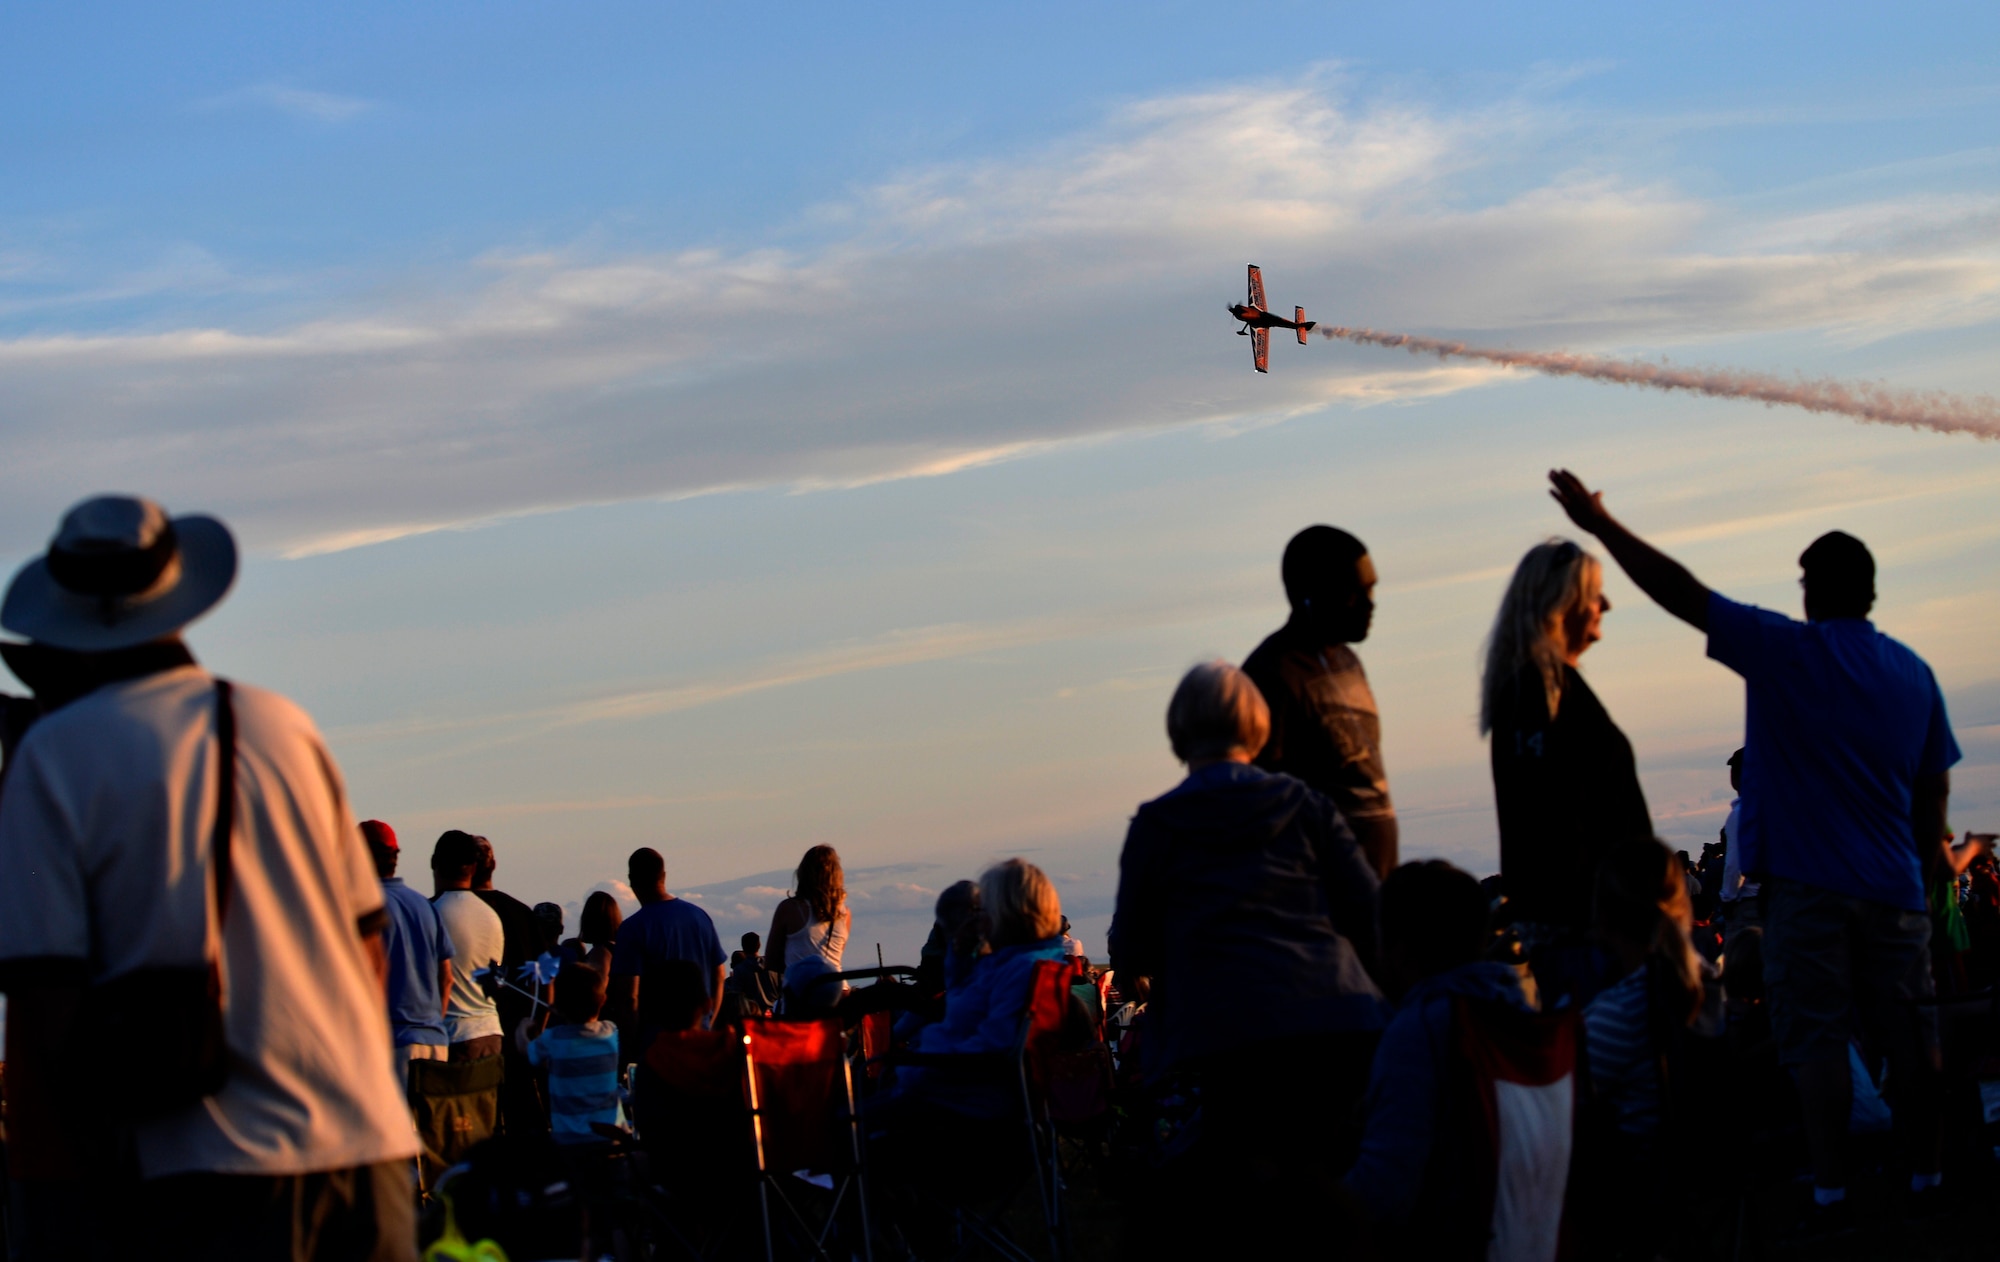 A Harvard performs at the 2015 Lethbridge International Airshow July 24, 2015, in Lethbridge, Alberta province, Canada. The airshow featured performances from the Royal Canadian Forces Snowbirds, Canadian Forces CF-18 Hornet, B-17 Flying Fortress, T-33 Shooting Star, and more. (U.S. Air Force photo by Airman 1st Class Christian Clausen/Released)
